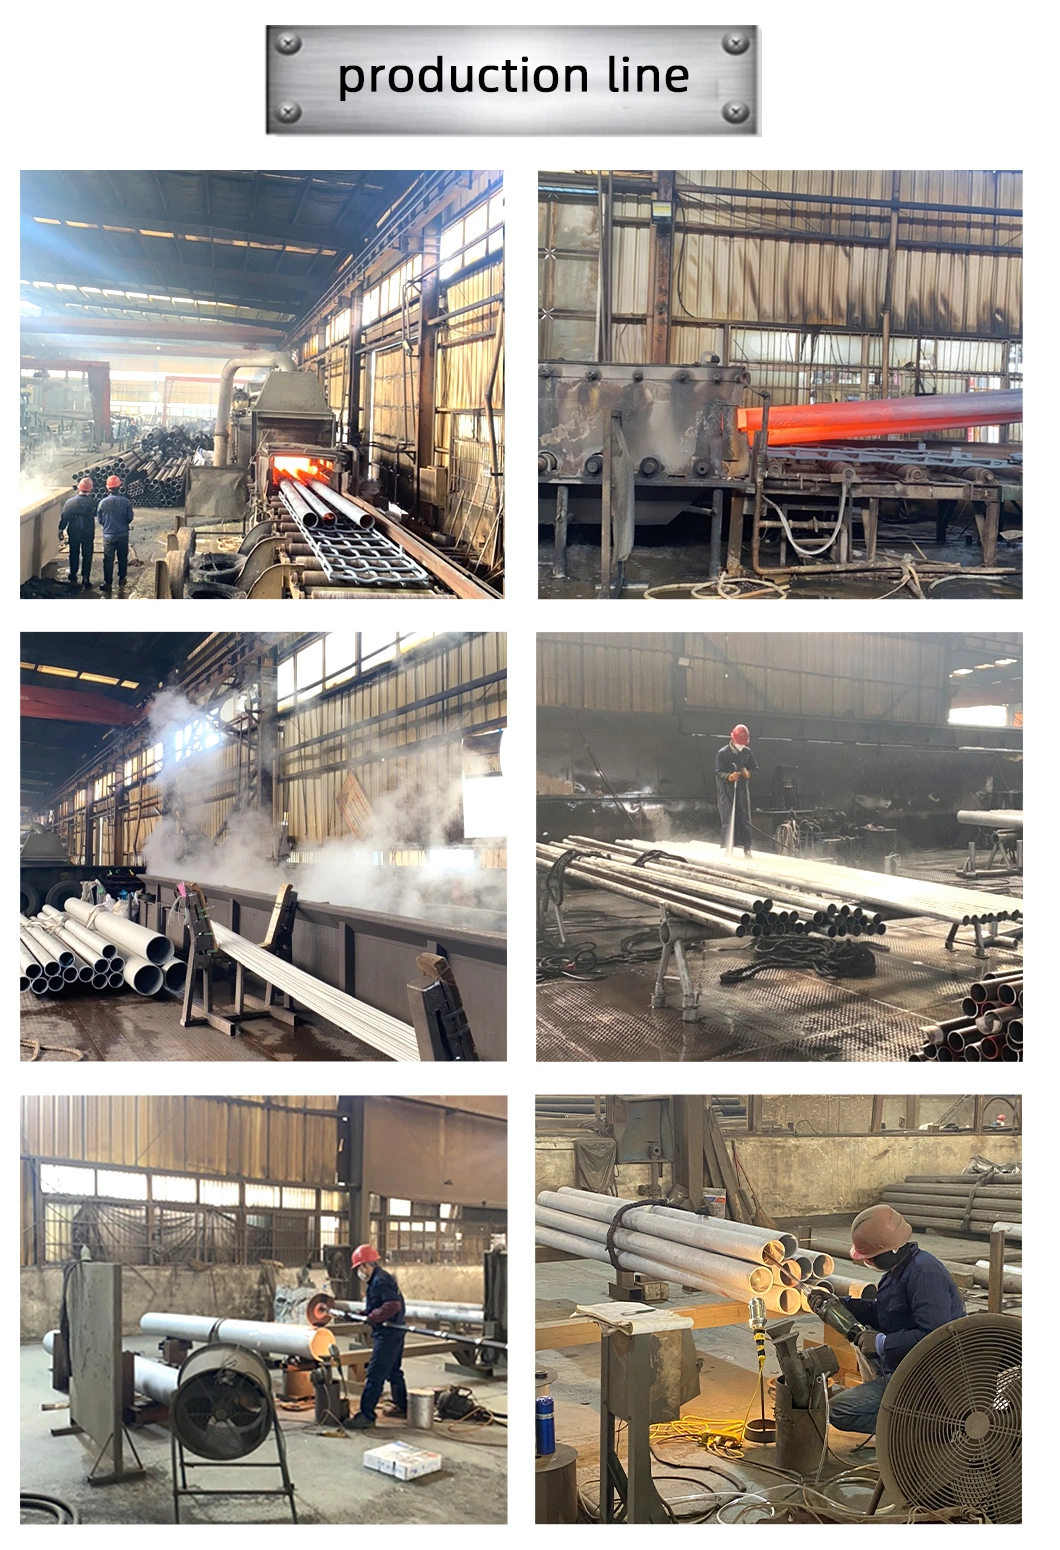 Manufacturer of Nickel Base Alloy Hastelloy Superalloy Gh4145 Pipe and Stainless Steel Pipe Gas Steel Pipe